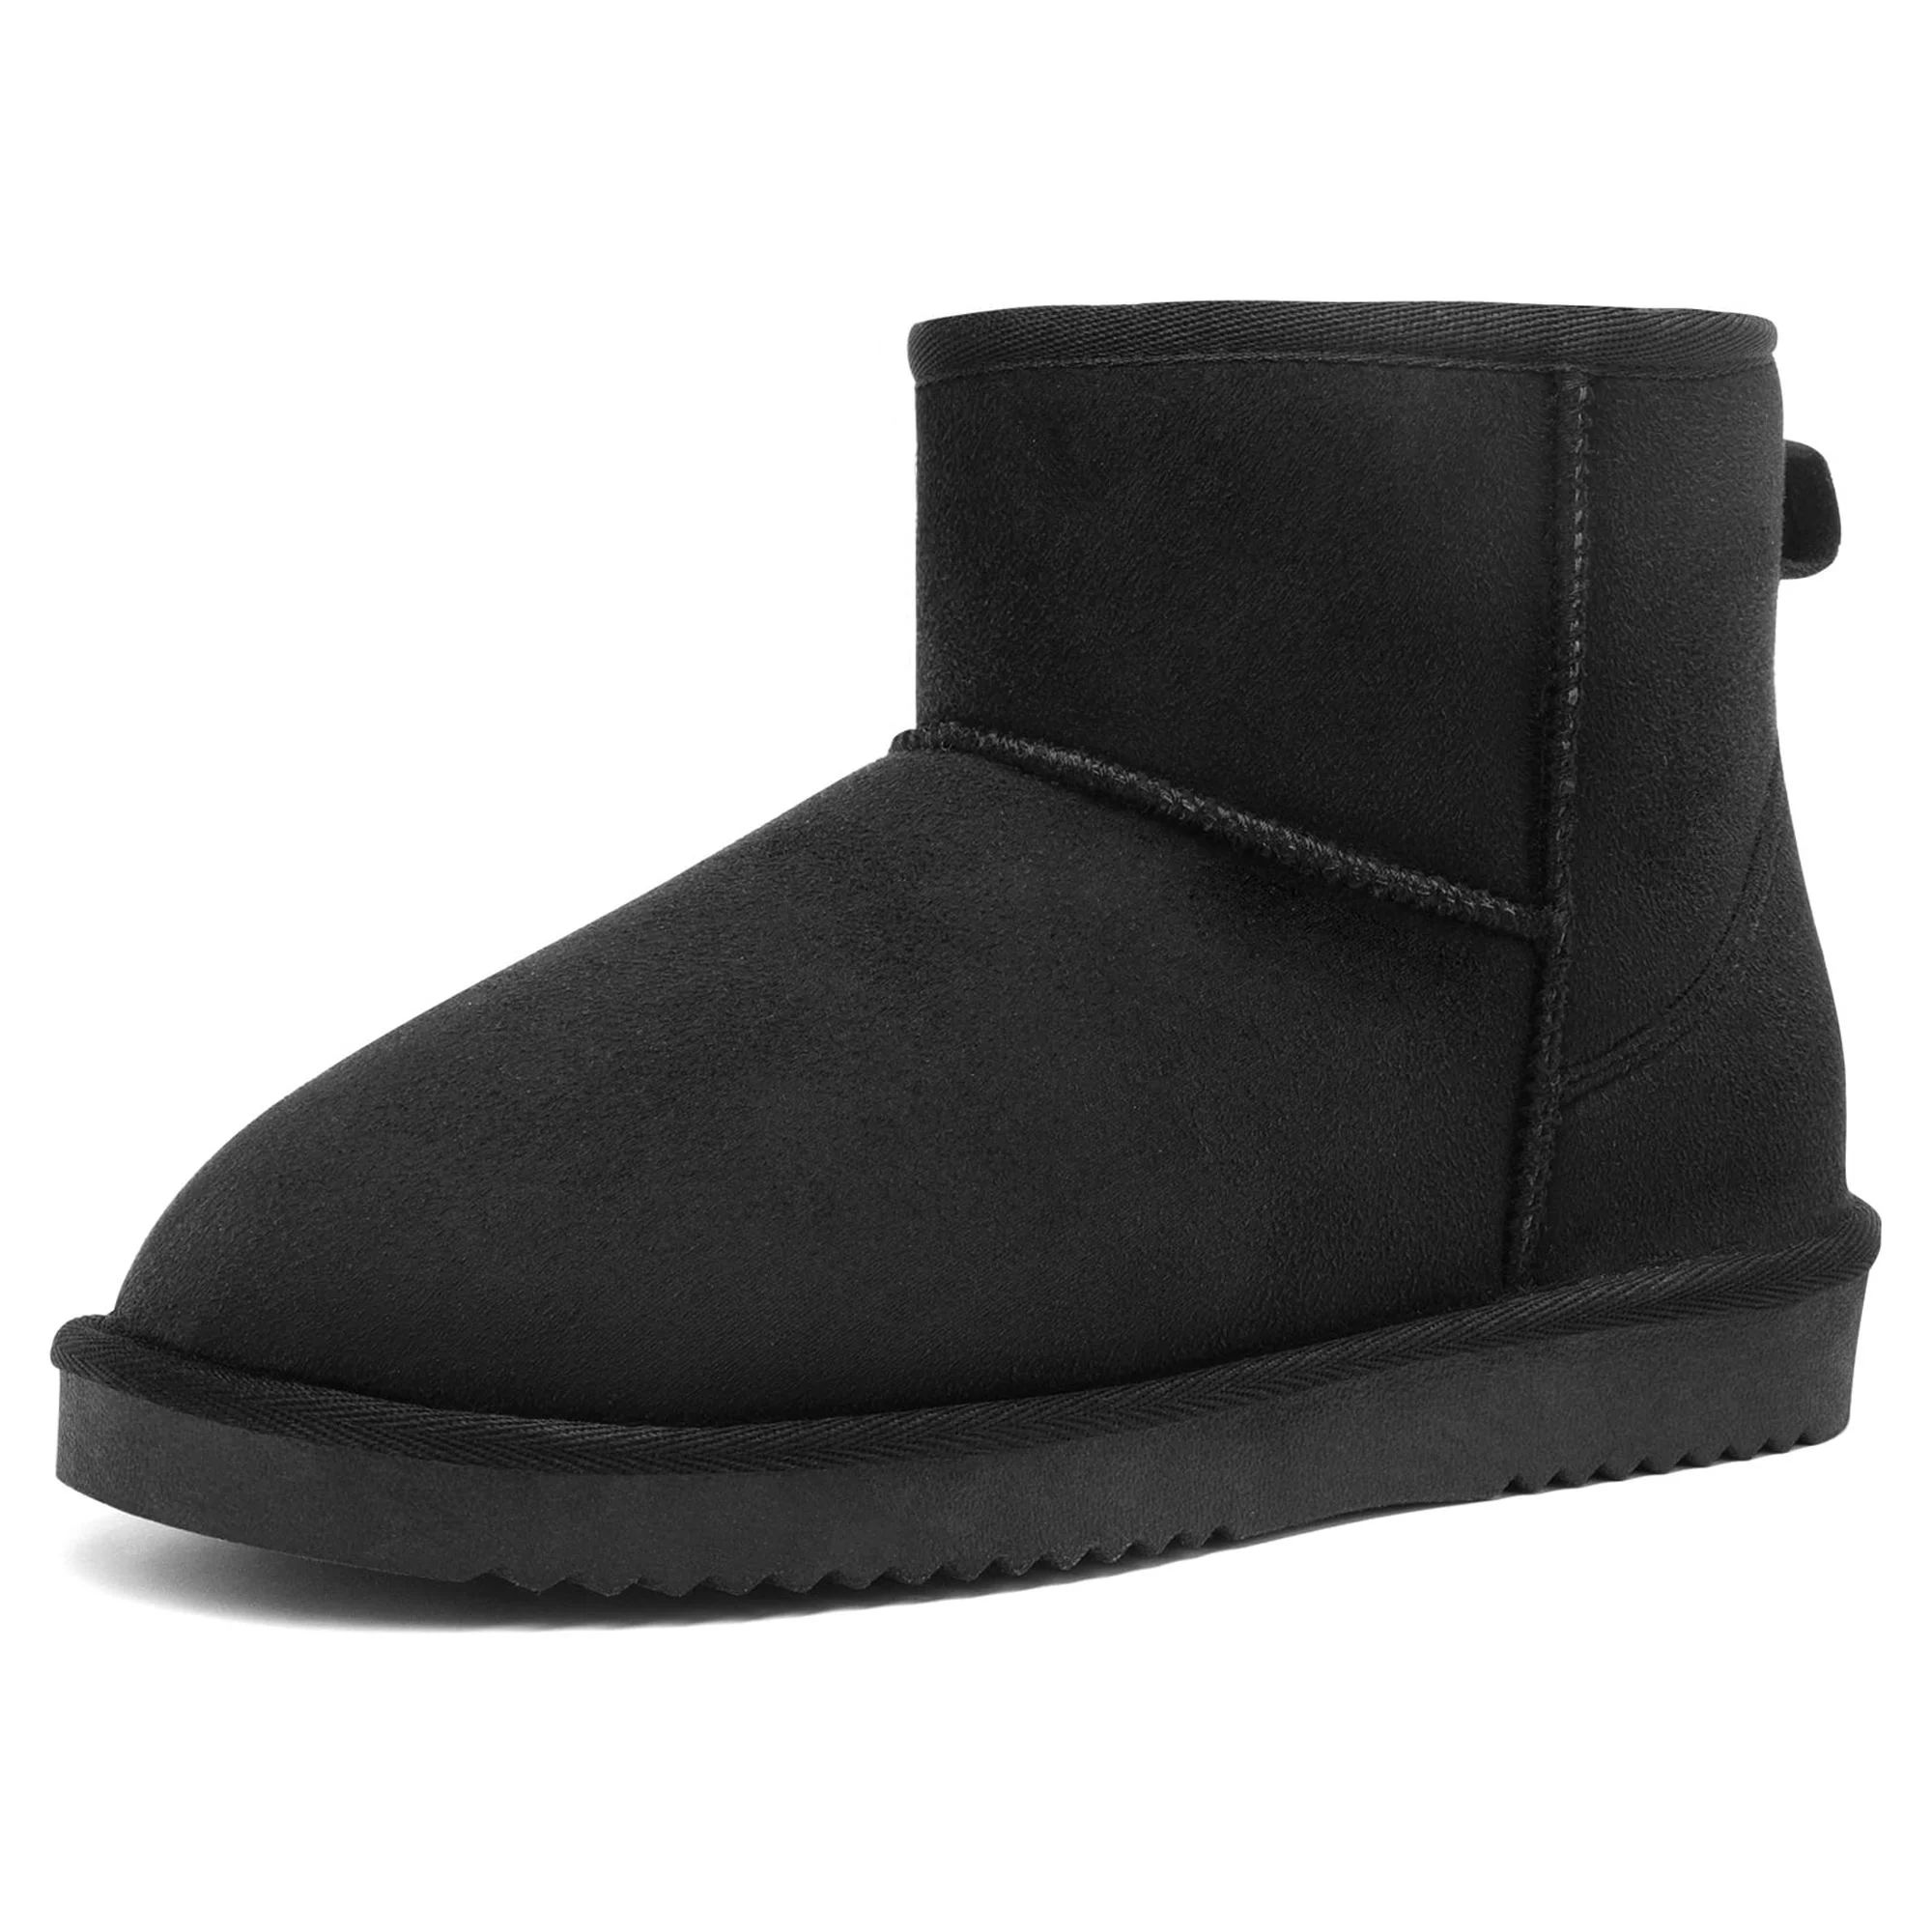 DREAM PAIRS Women's Winter Warm Snow Boots Classic Slip On Ankle Snow Boots DSB214 | Walmart (US)